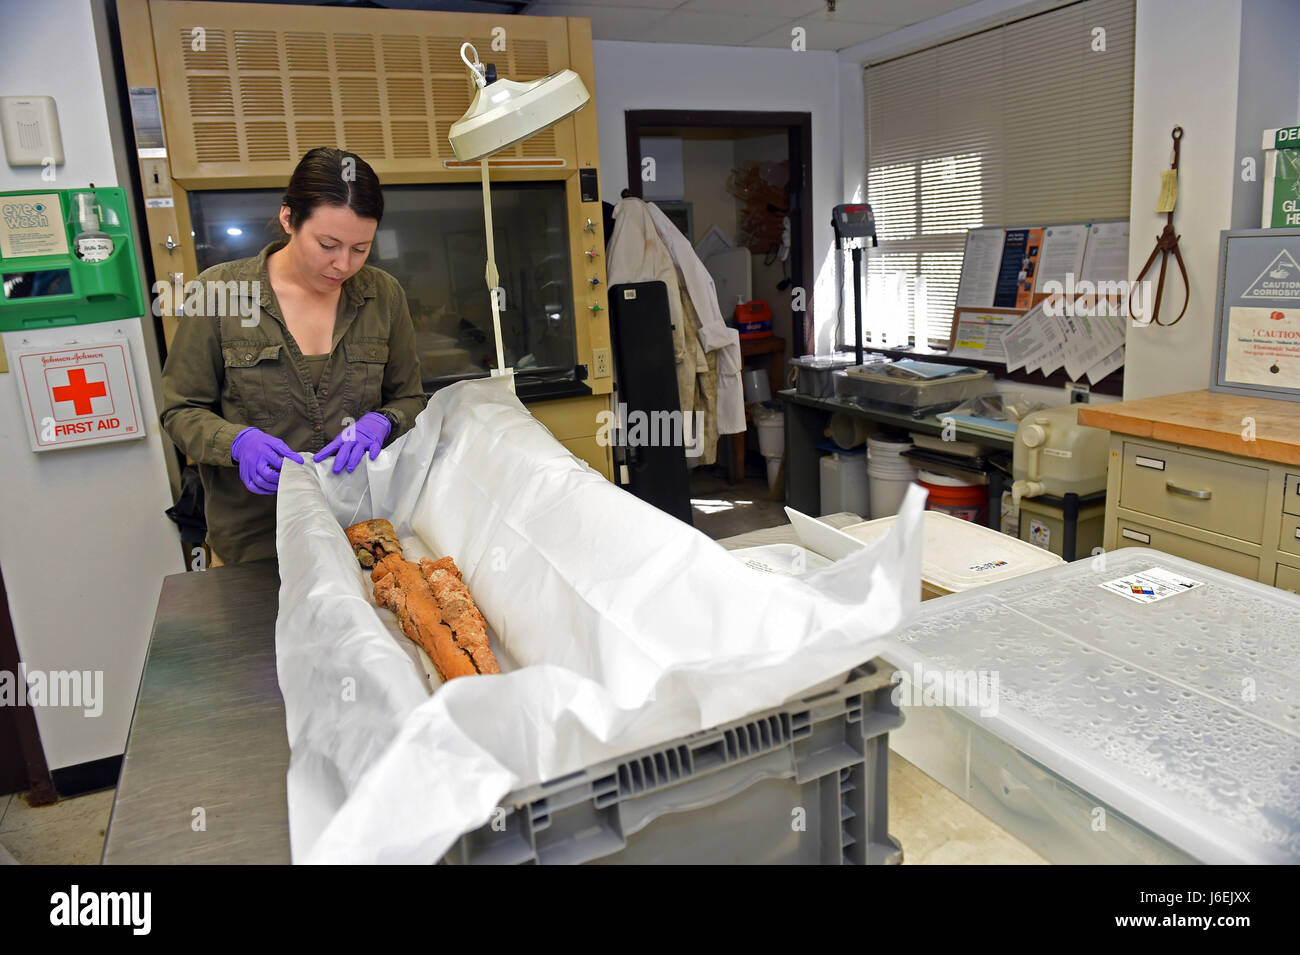 160817-N-PM781-001 WASHINGTON (Aug. 17, 2016) Kate Morrand, an archaeological conservator at Naval History and Heritage Command’s (NHHC) Underwater Archaeology Branch, displays an M1 Garand rifle used by U.S. Marine Corps Raiders during the World War II attack on Japanese military forces on Makin Island. Due to the rifle’s significant surface concretions, corrosion and other physical damage, NHHC Underwater Archaeology Branch is performing an assessment of the artifacts stability. (U.S. Navy photo by Arif Patani/Released) Stock Photo